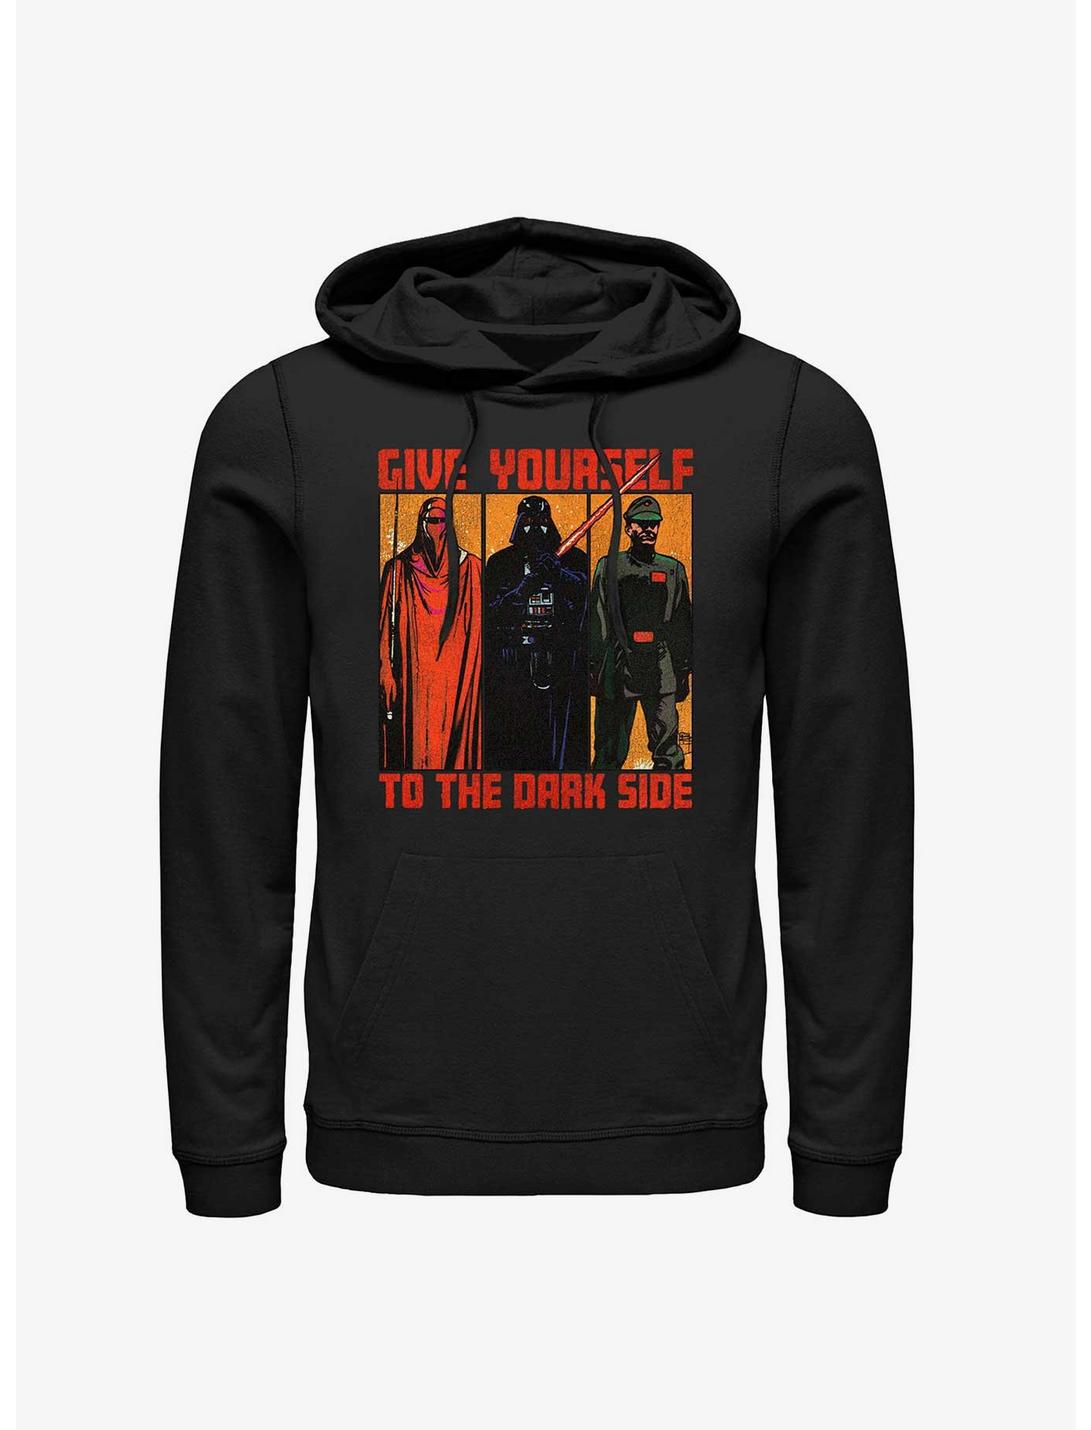 Star Wars Return Of The Jedi Give Yourself To The Dark Side Hoodie, BLACK, hi-res